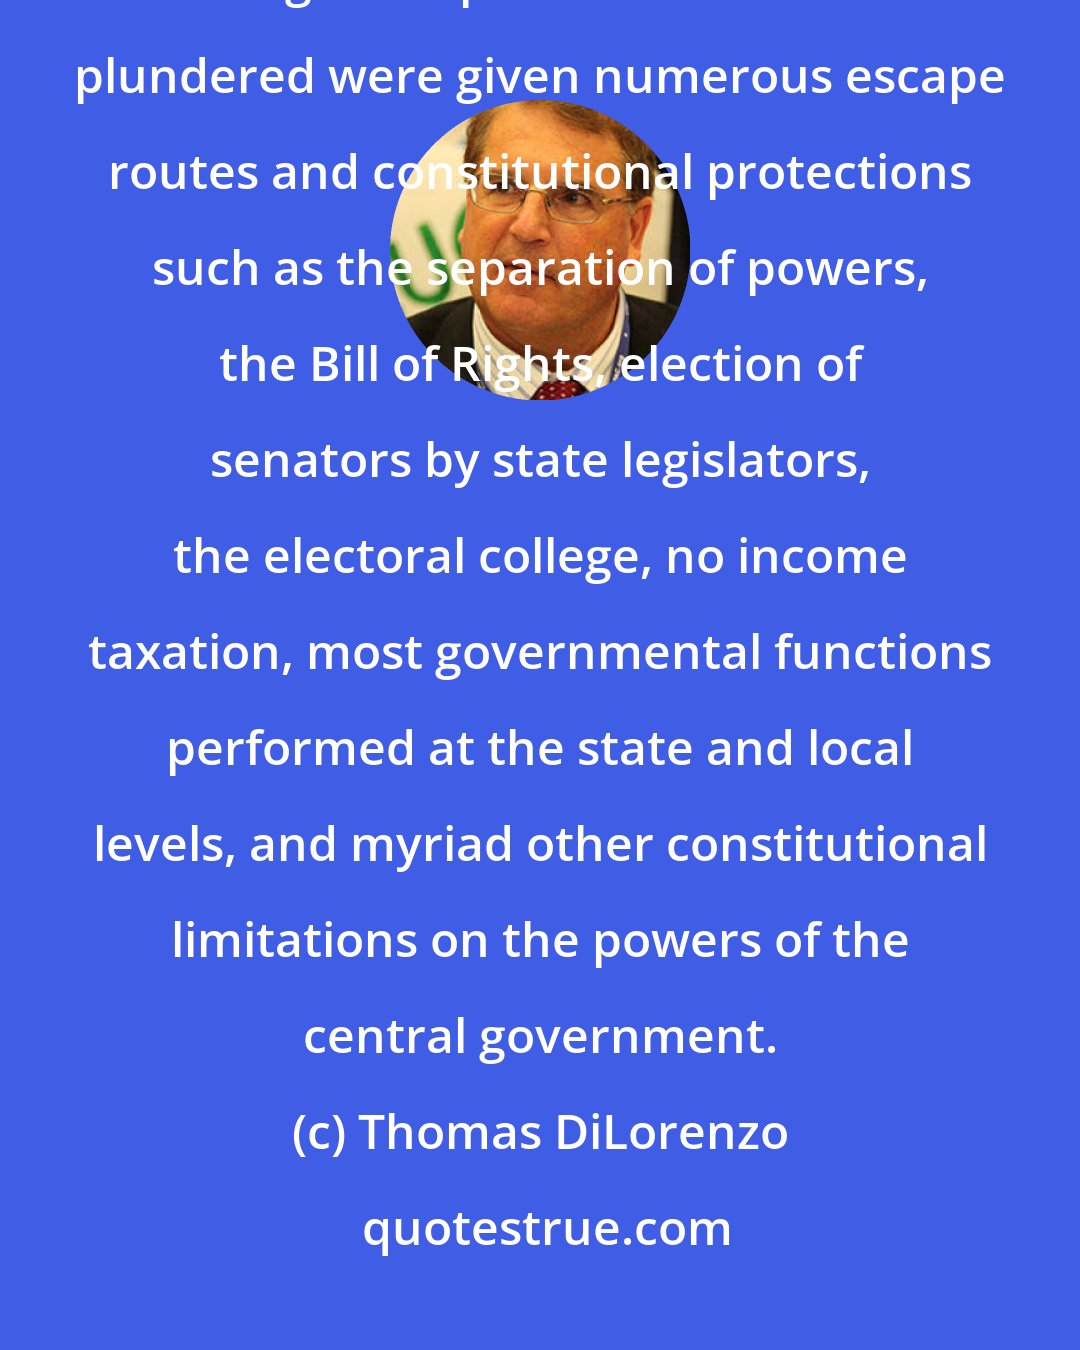 Thomas DiLorenzo: The founders understood that democracy would inevitably evolve into a system of legalized plunder unless the plundered were given numerous escape routes and constitutional protections such as the separation of powers, the Bill of Rights, election of senators by state legislators, the electoral college, no income taxation, most governmental functions performed at the state and local levels, and myriad other constitutional limitations on the powers of the central government.